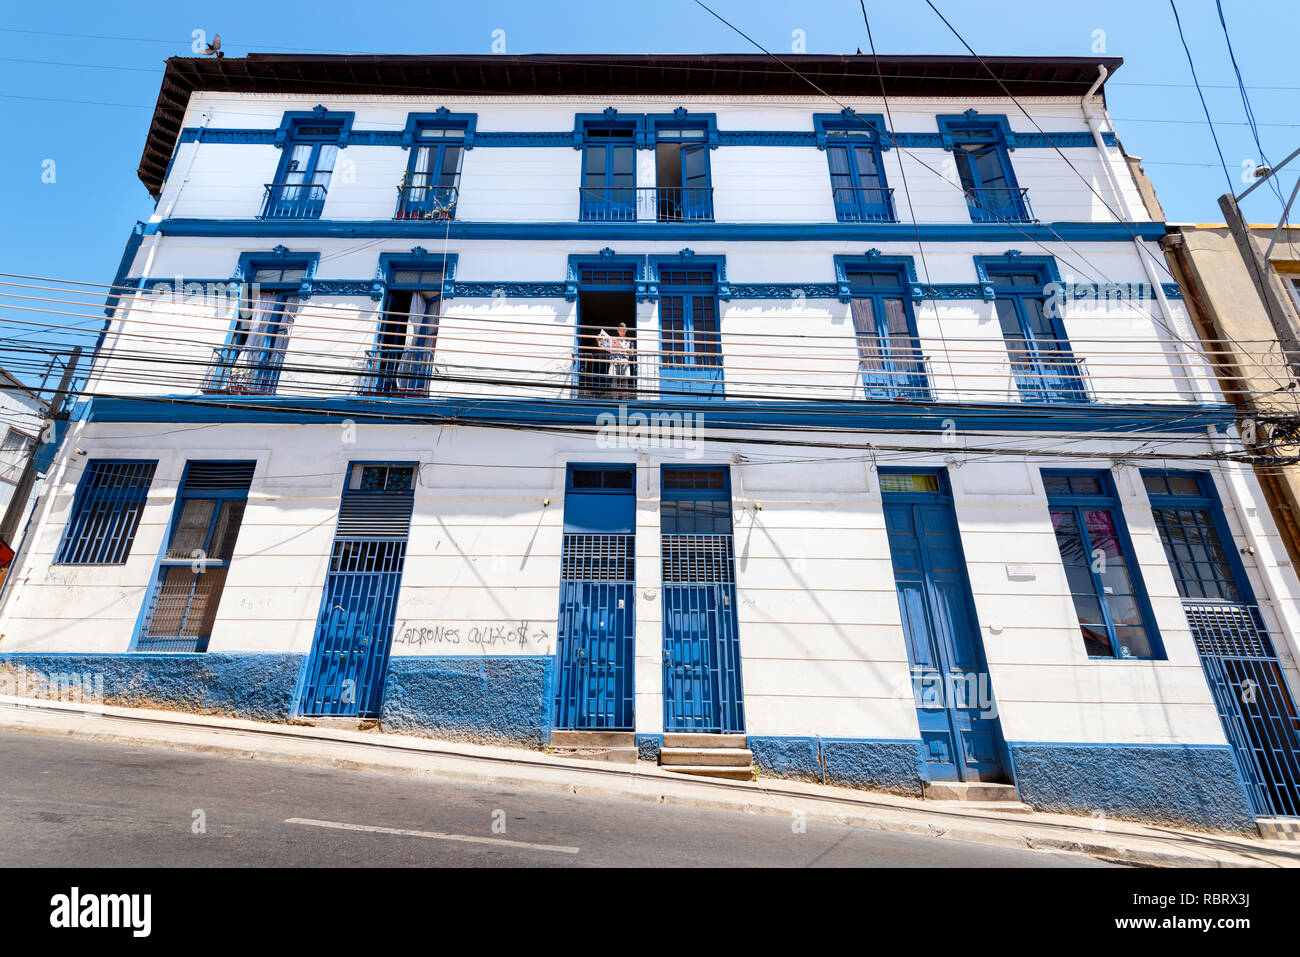 Blue and white housing block on a steep hillside location, by a street, in Valparaiso, Chile, with one of the residents reading a paper. Stock Photo